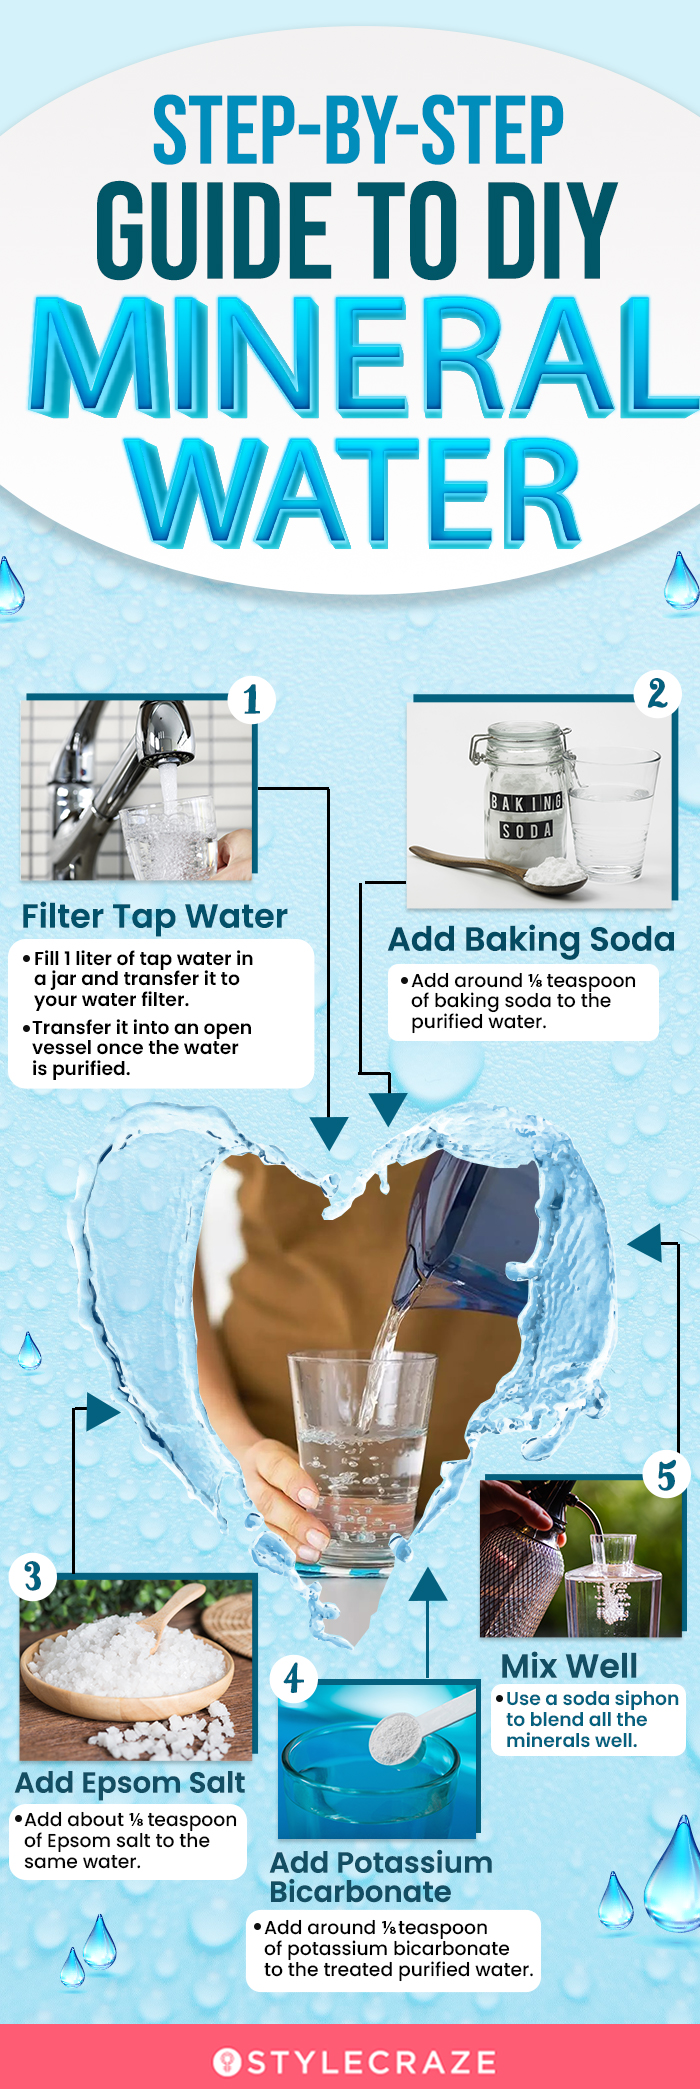 step by step guide to diy mineral water [infographic]